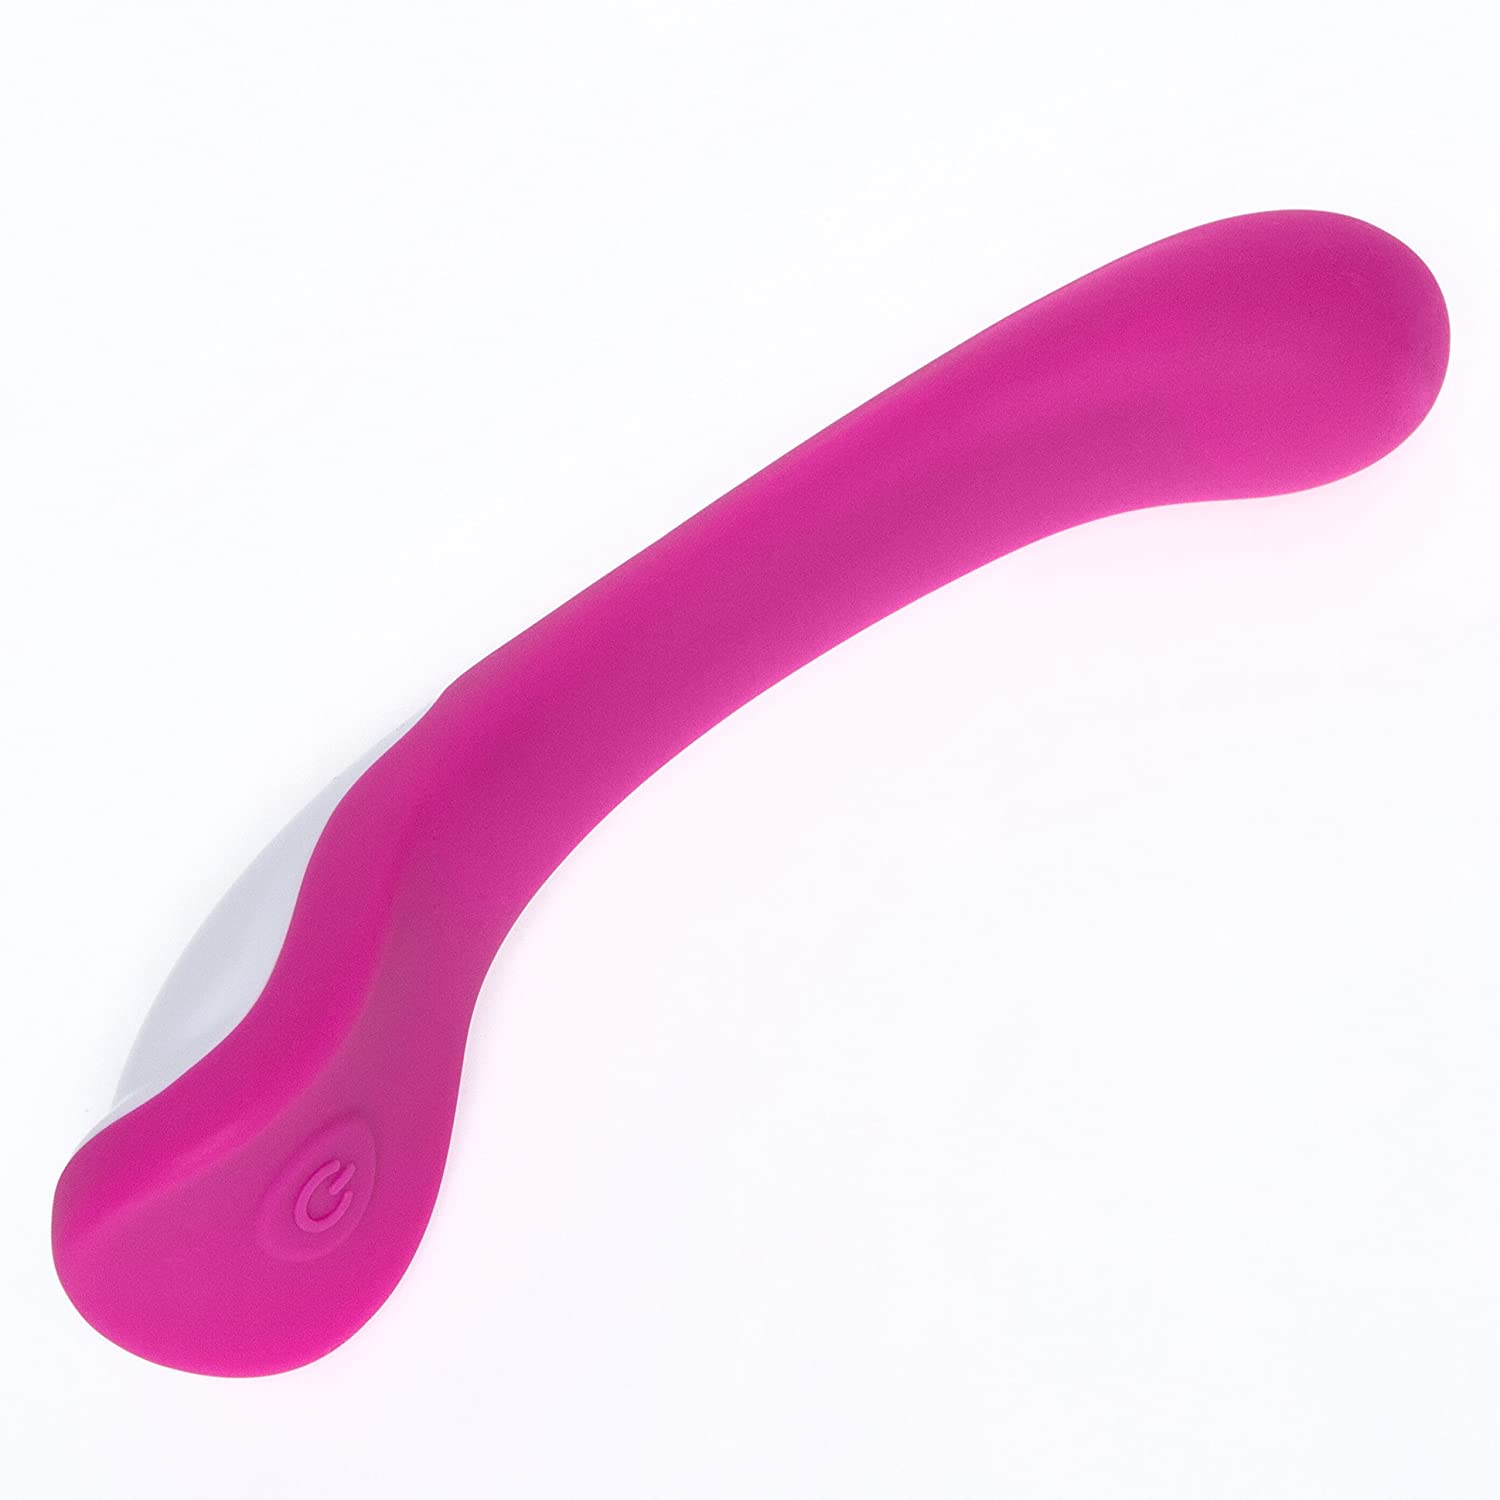 General reccomend Absolutely angelic g spot vibrator review